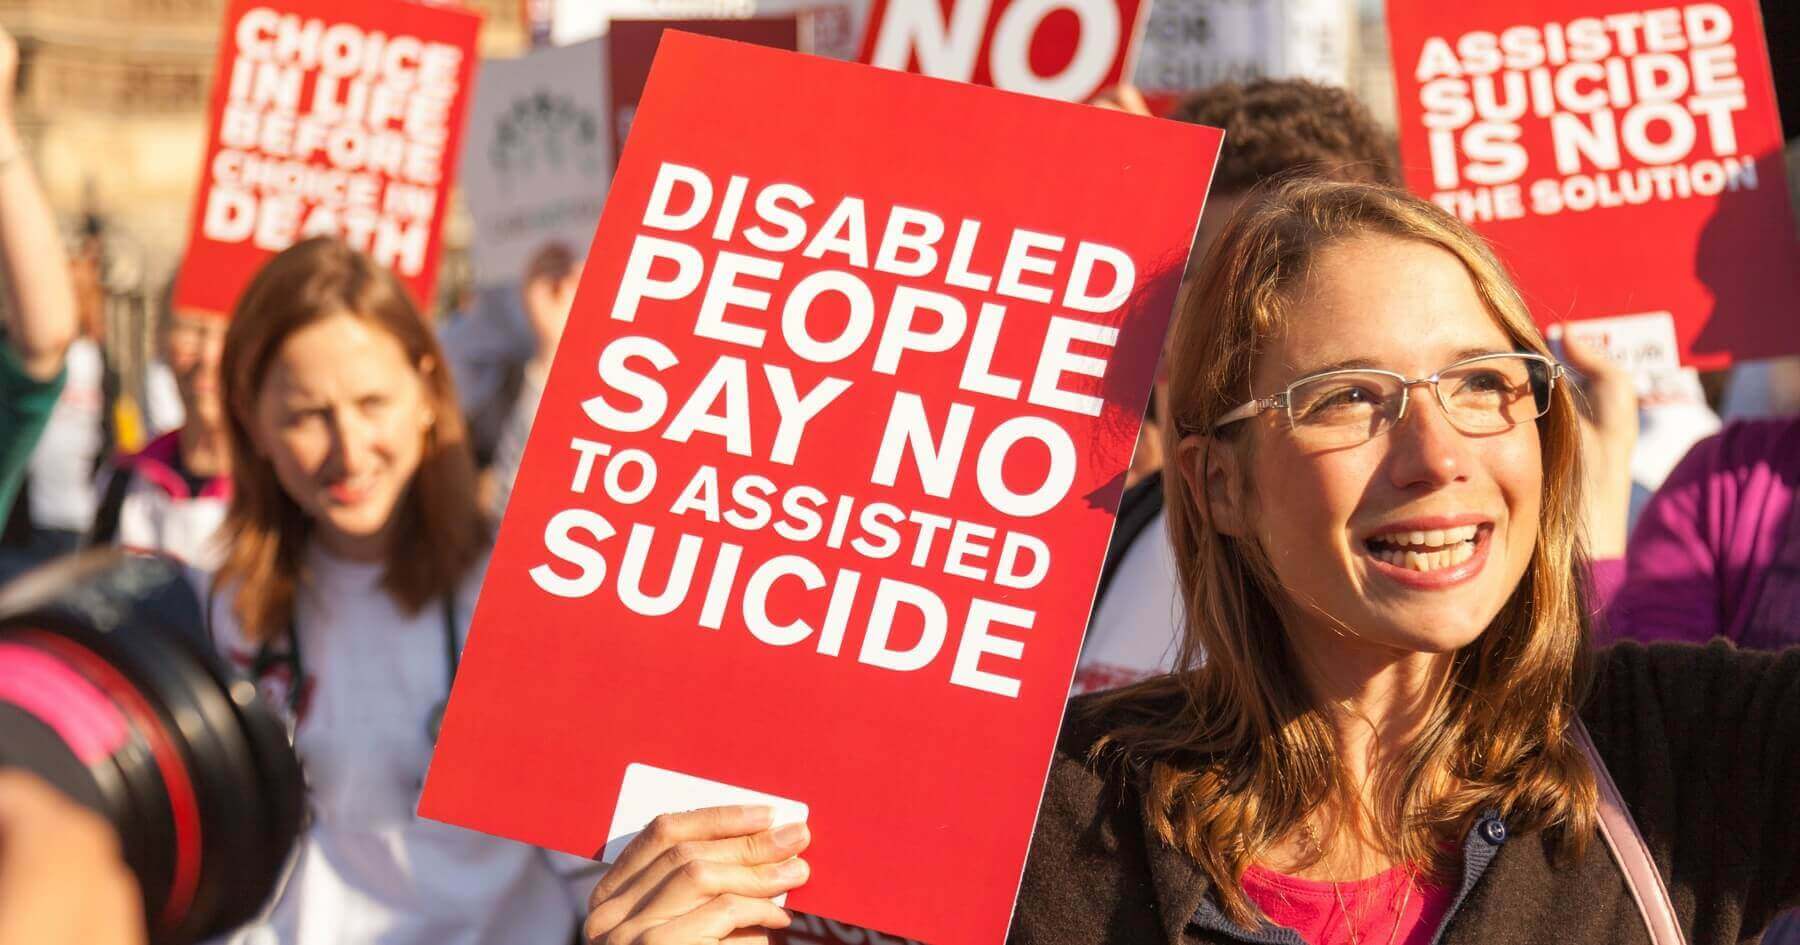 Oppose introducing assisted suicide-share